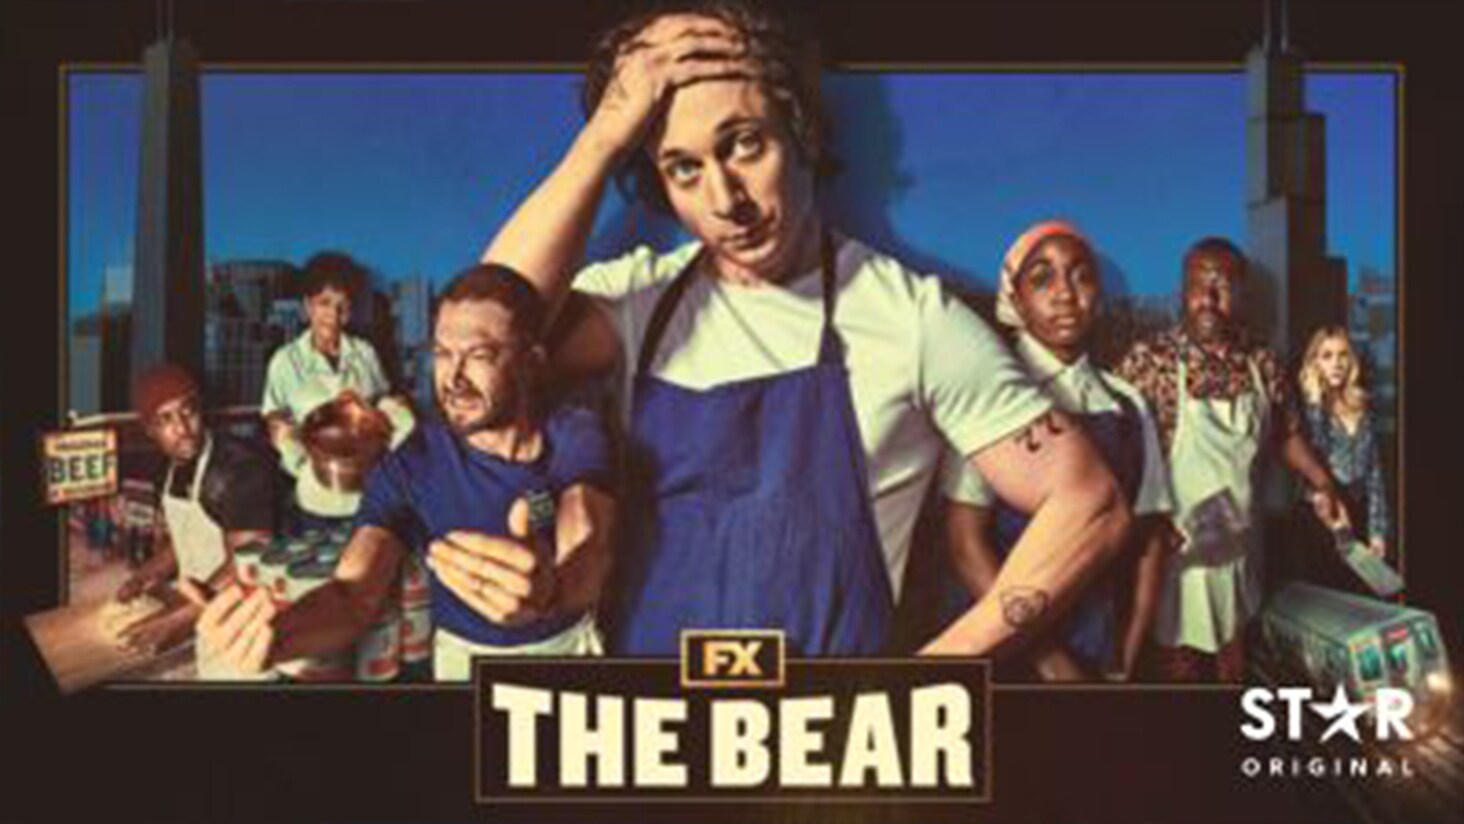 An image featuring Jeremy Allen White as Chef Carmy from series The Bear, surrounded by supporting cast and elements of the restaurant The Original Beef of Chicagoland.